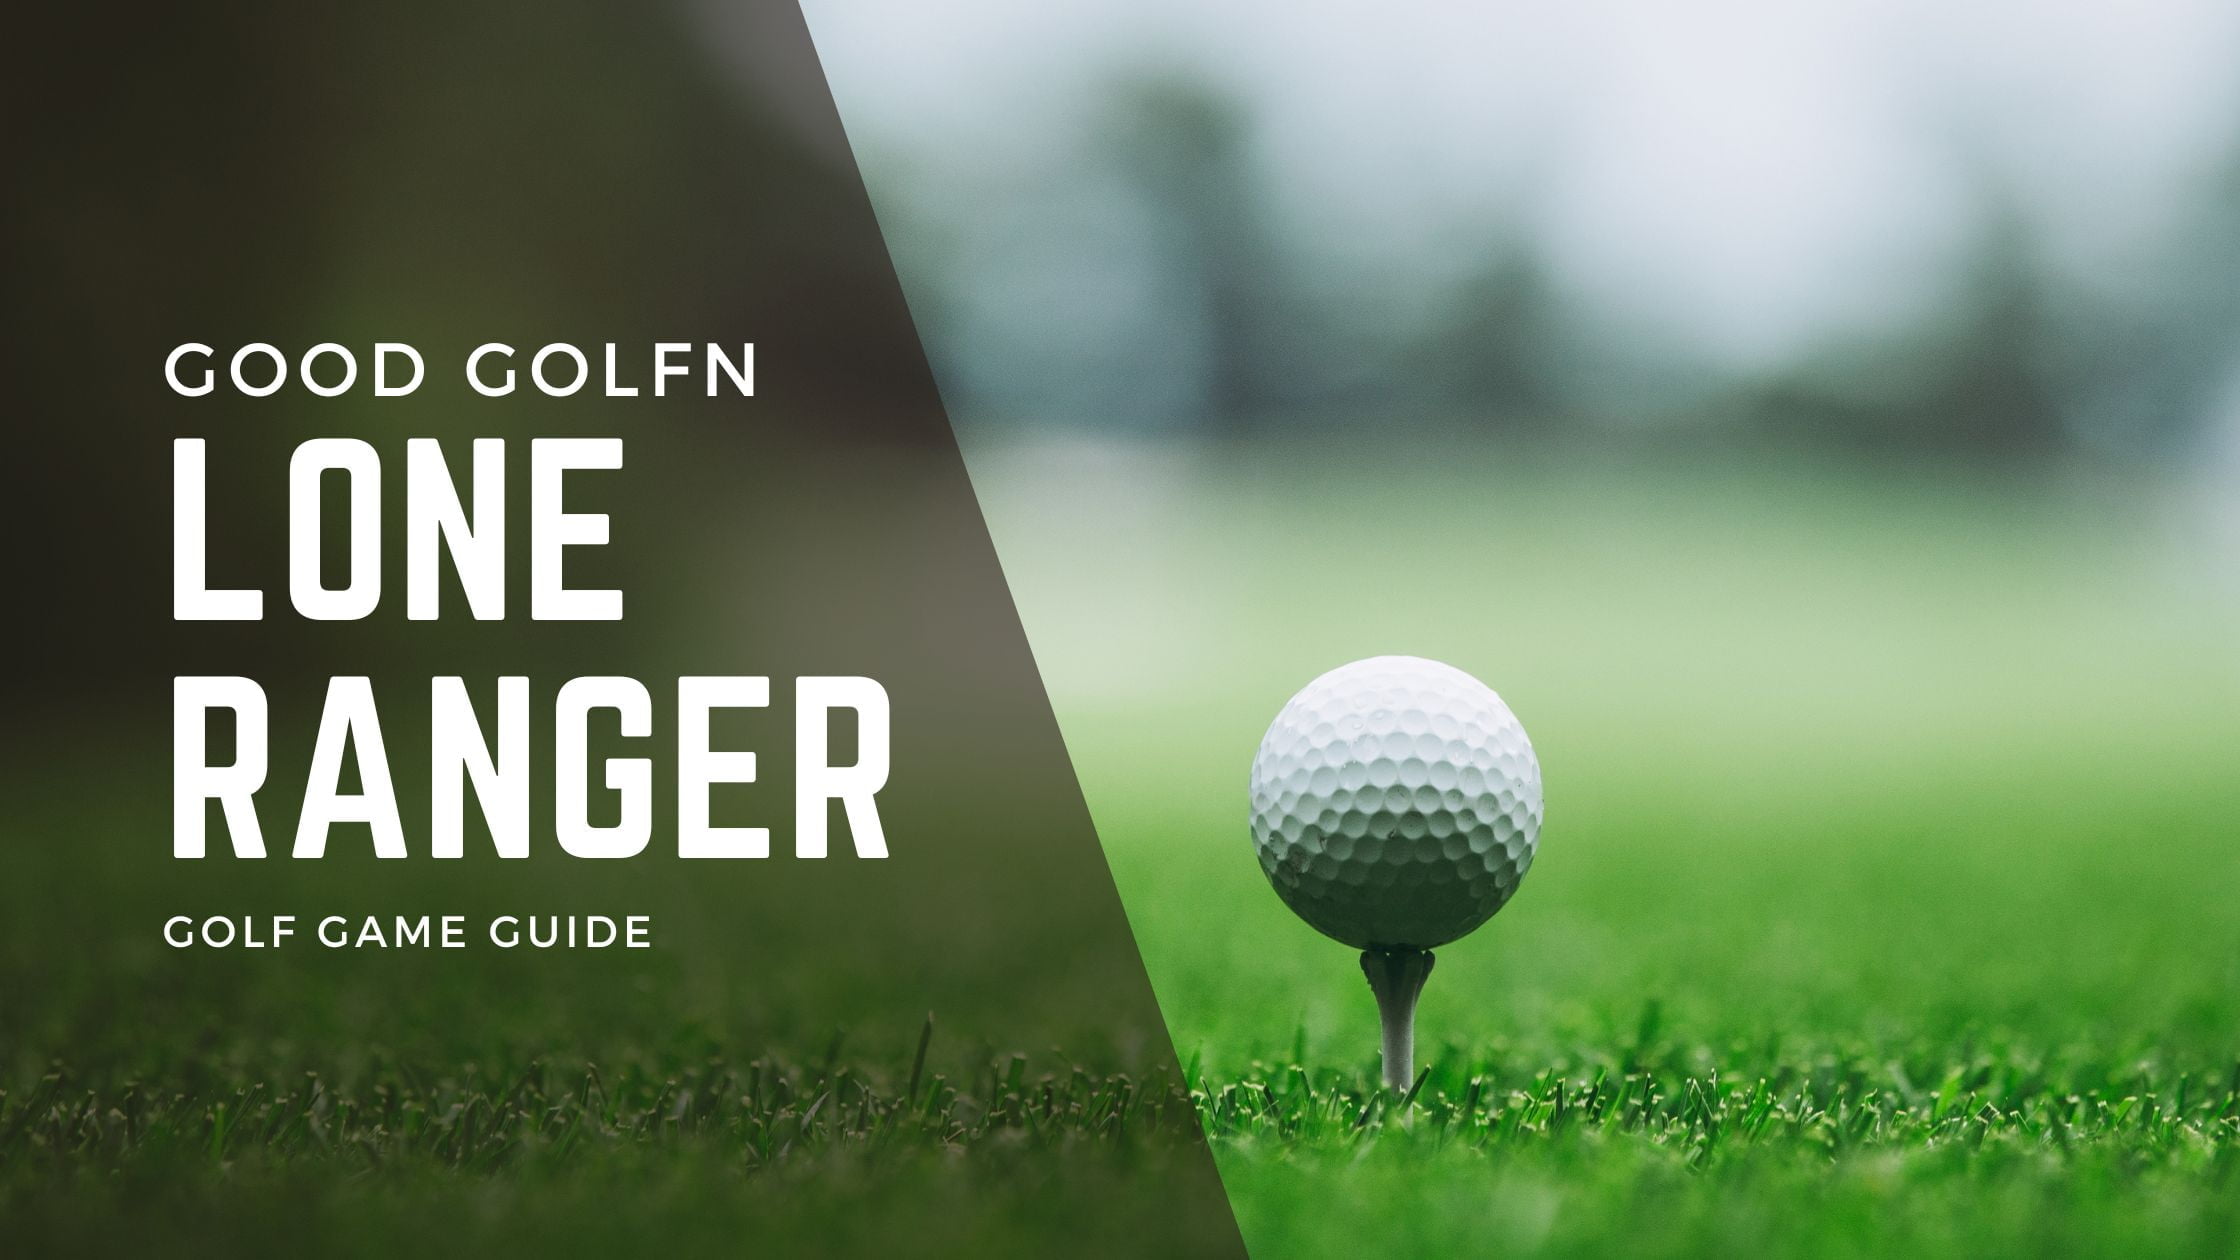 Dive into the intriguing world of golf with the Lone Ranger golf format, solo play tips, and team dynamics.